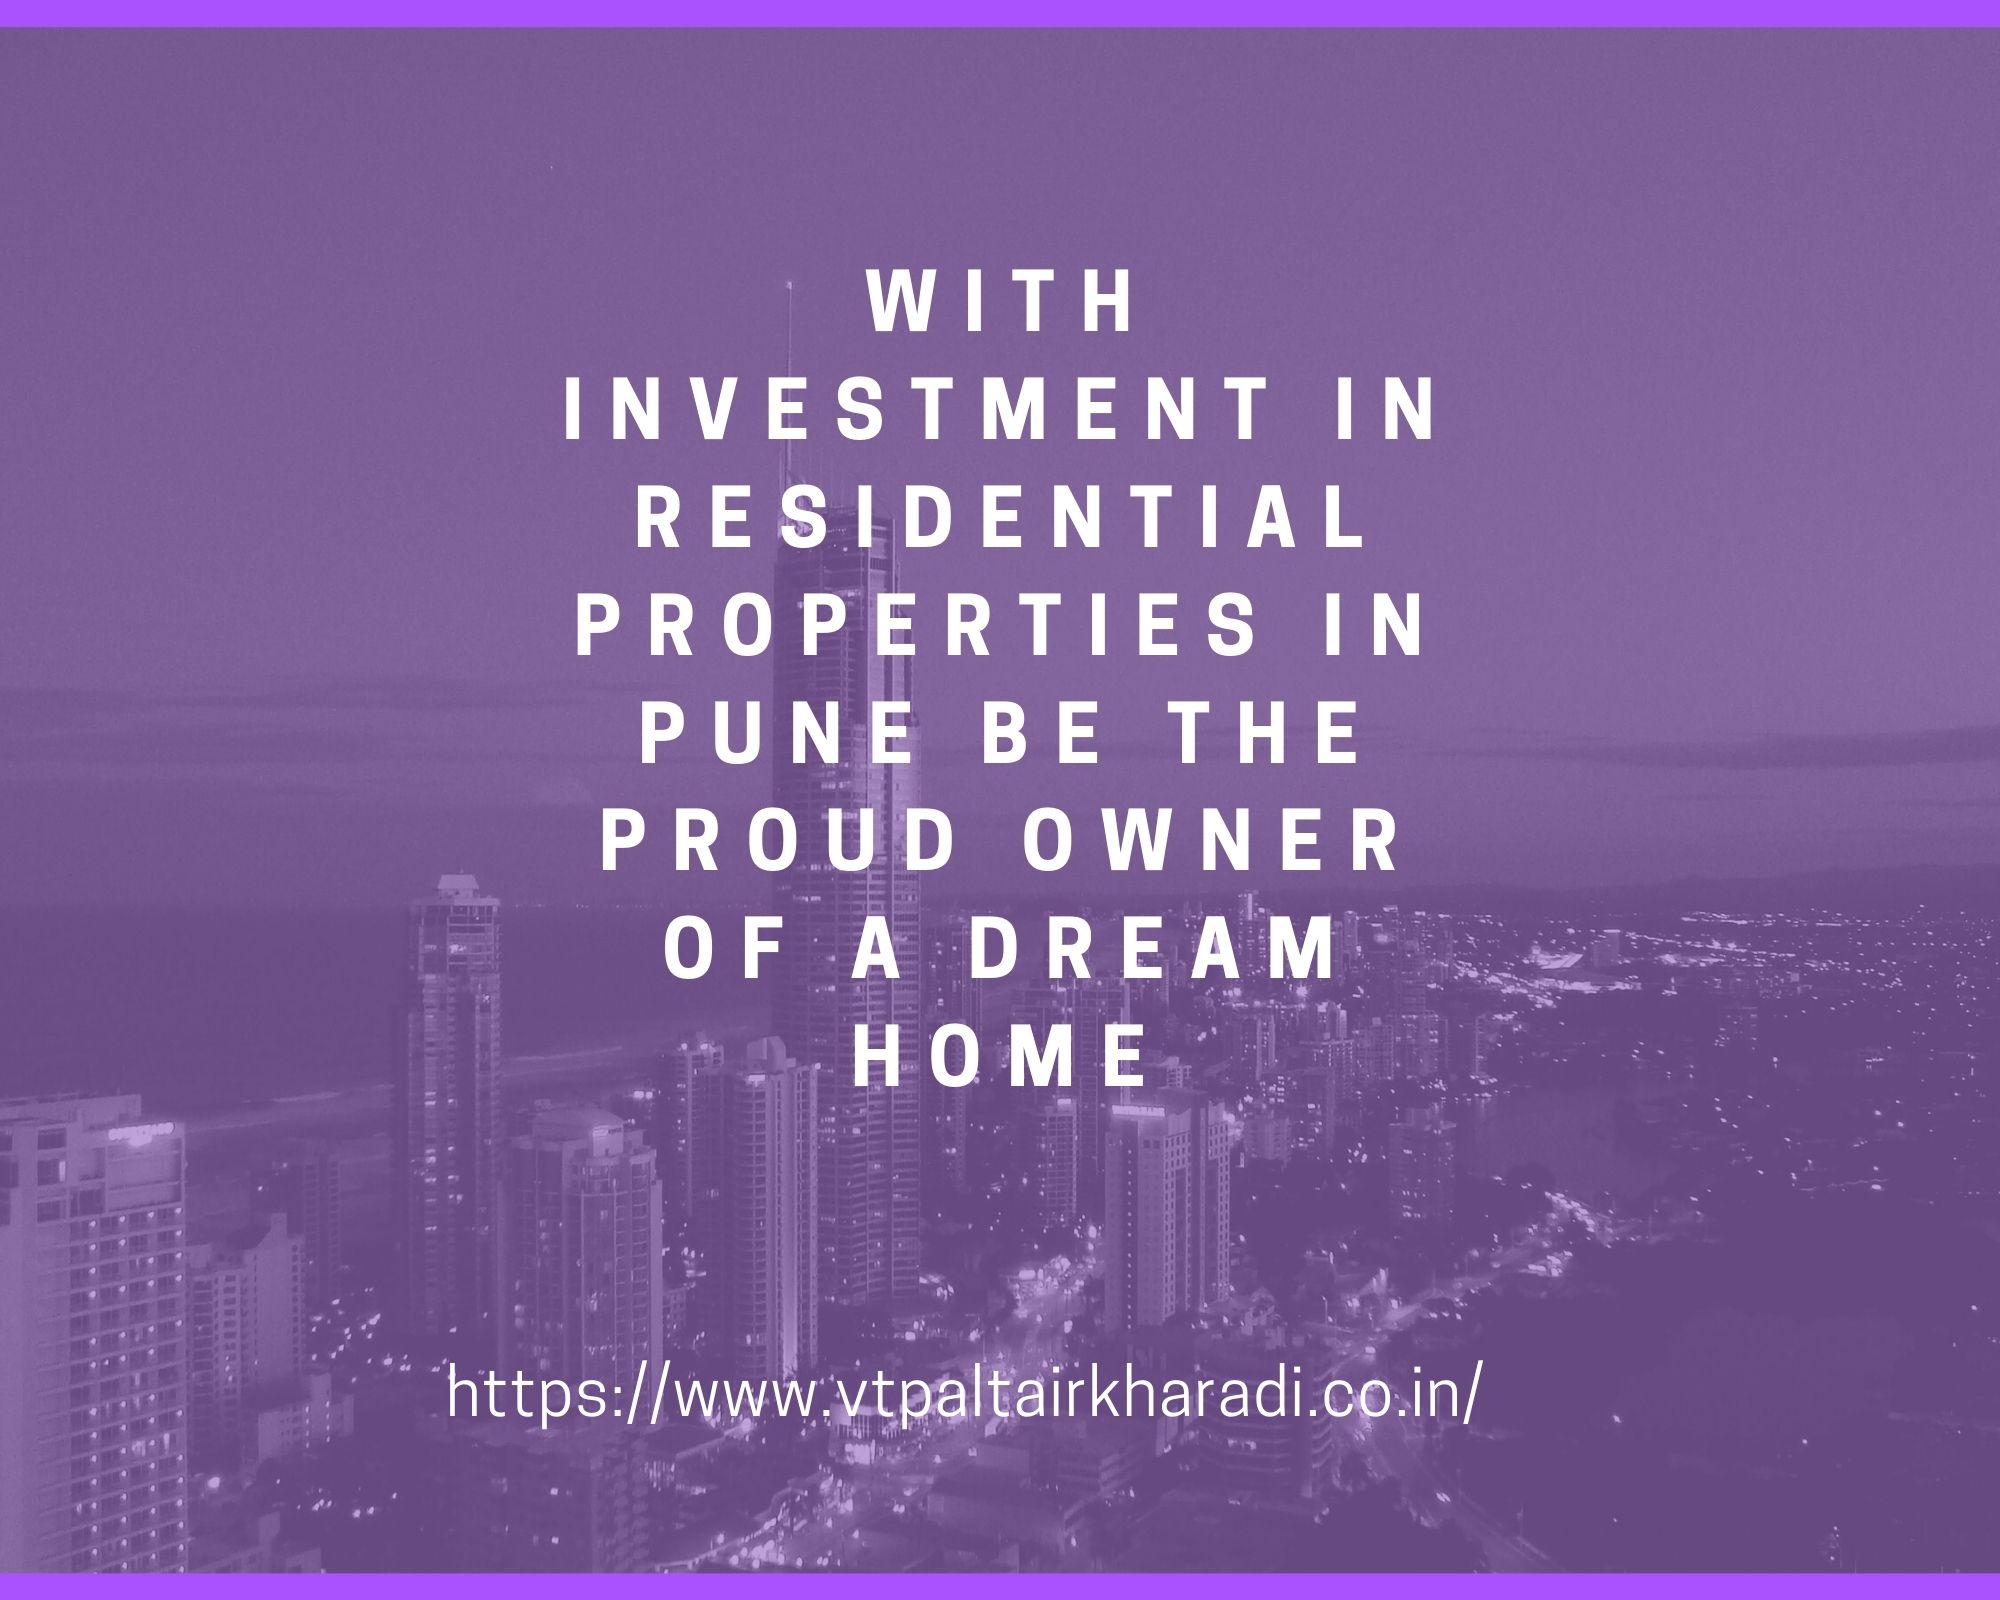 With Investment In Residential Properties In Pune Be The Proud Owner Of A Dream Home